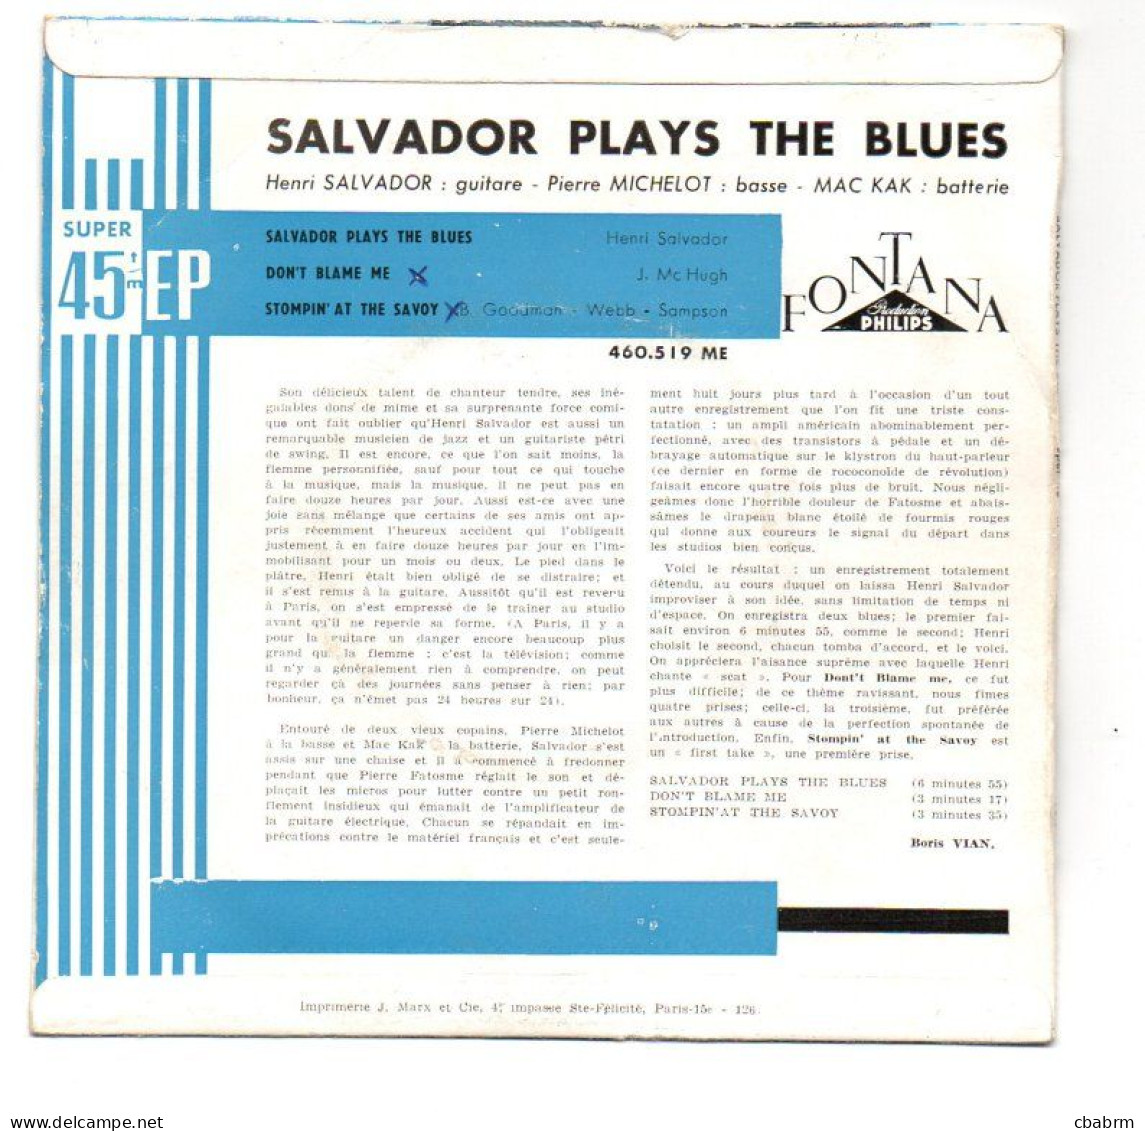 EP 45 TOURS HENRI SALVADOR PLAYS THE BLUES 1956 FRANCE Fontana 460.519 ME - Other - French Music